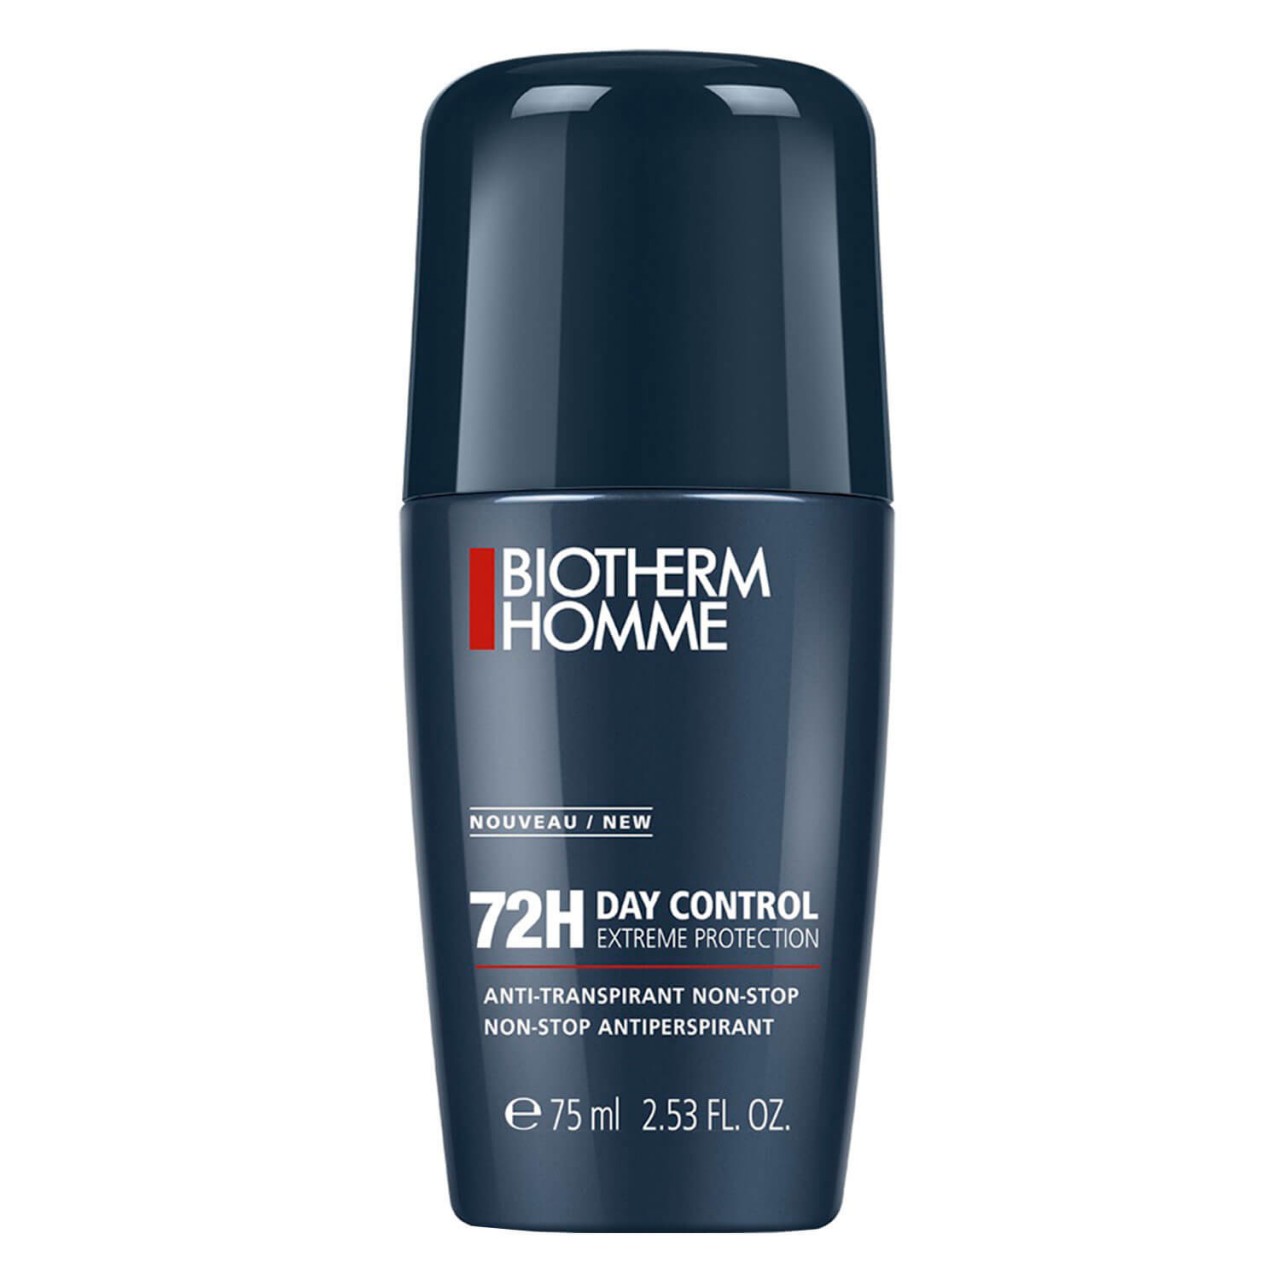 Biotherm Homme - Day Control 72H Extreme Protection von BIOTHERM